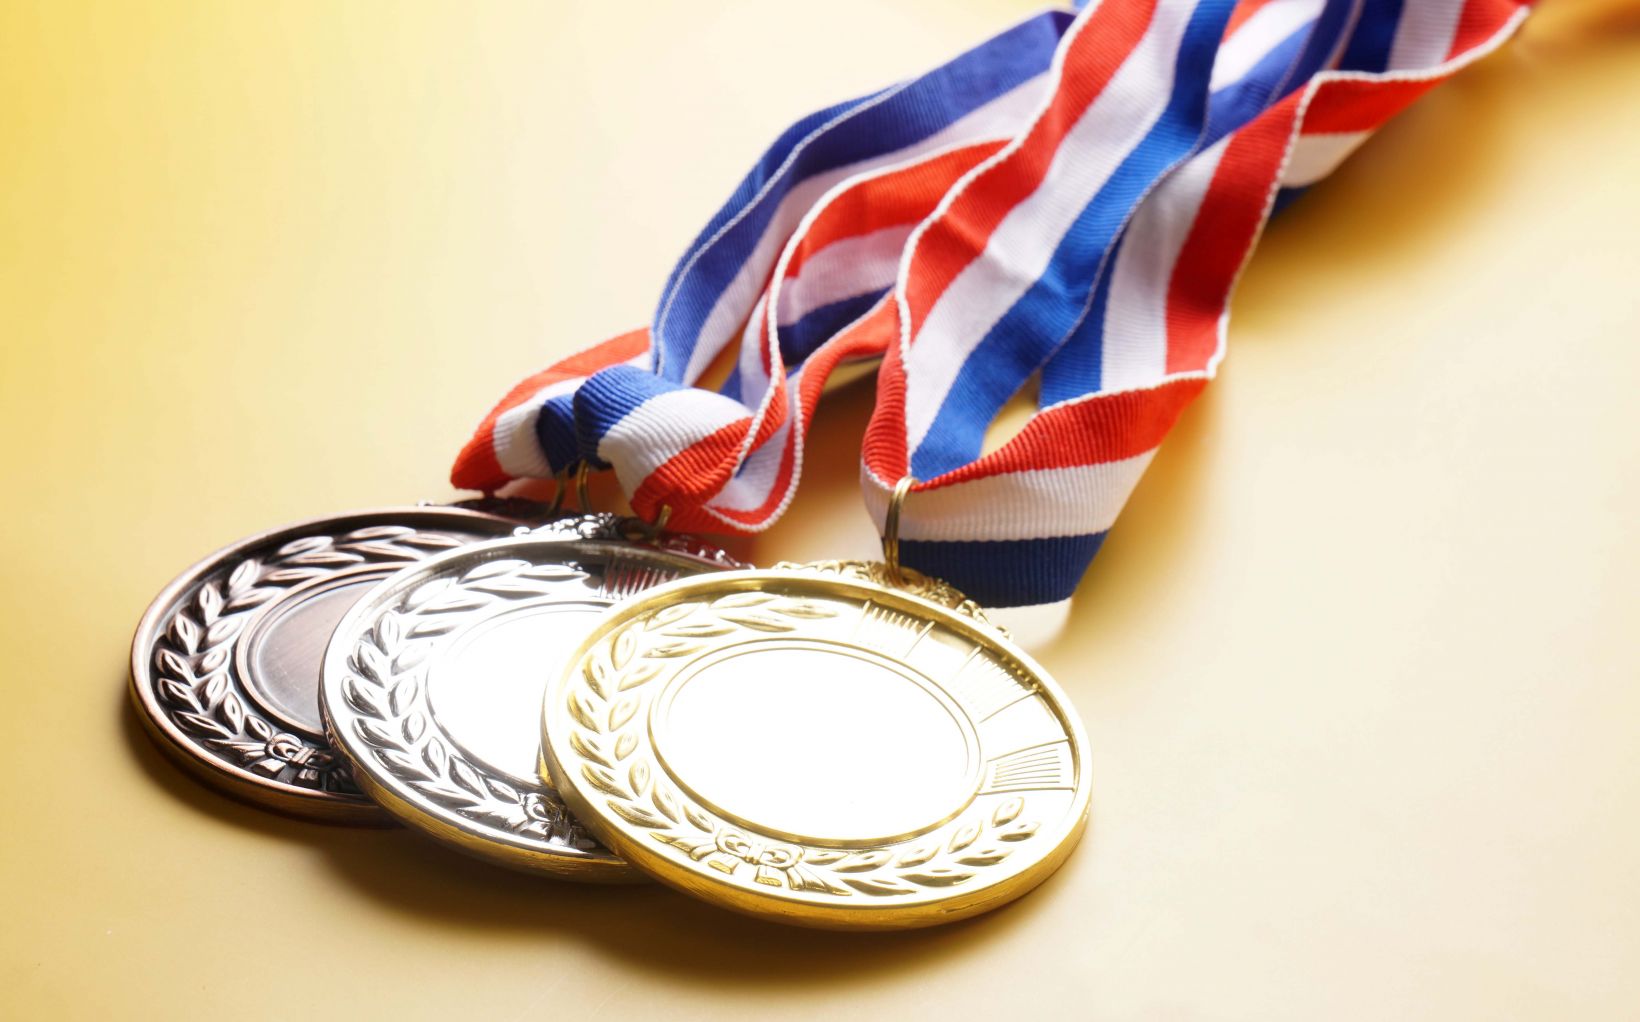 Gold, silver, and bronze medals